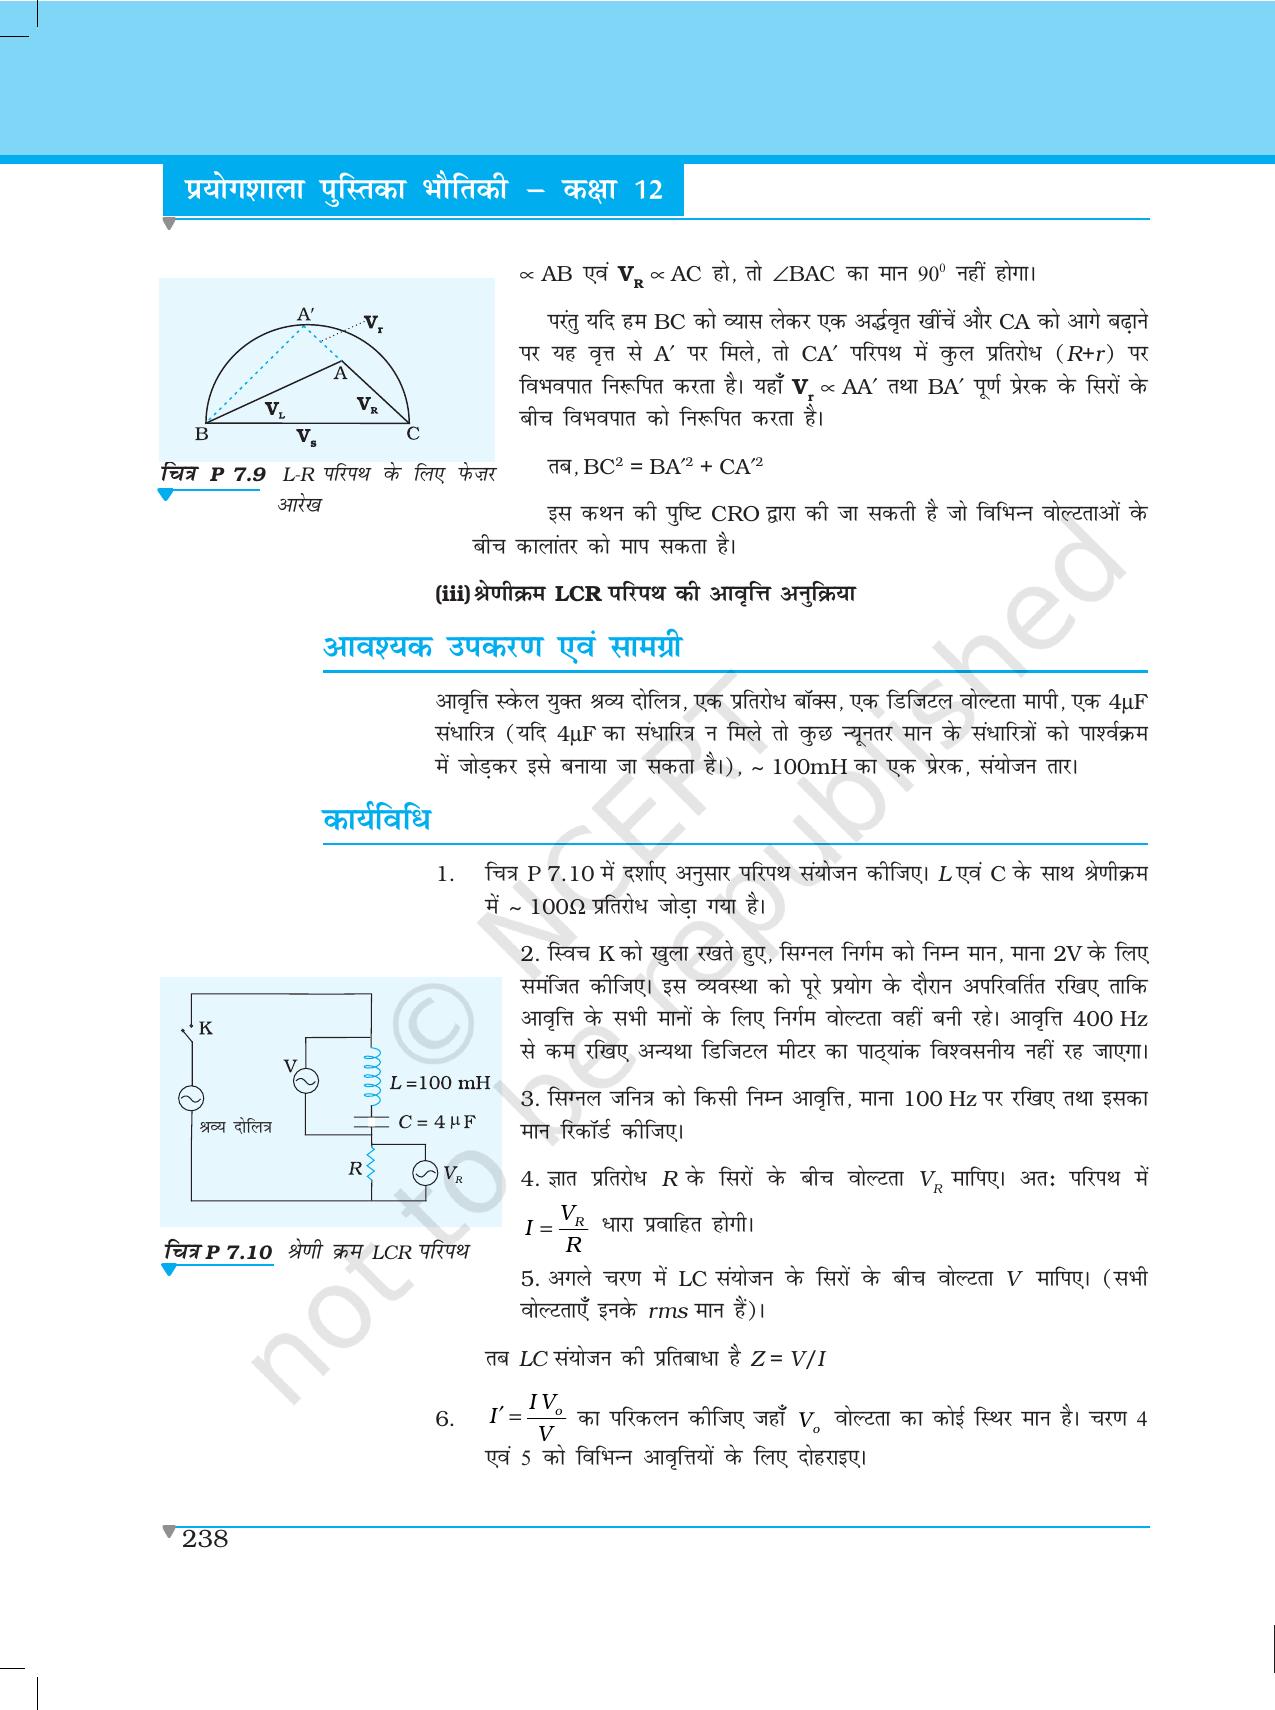 NCERT Laboratory Manuals for Class XII भौतिकी - परियोजना (1 - 7) - Page 32